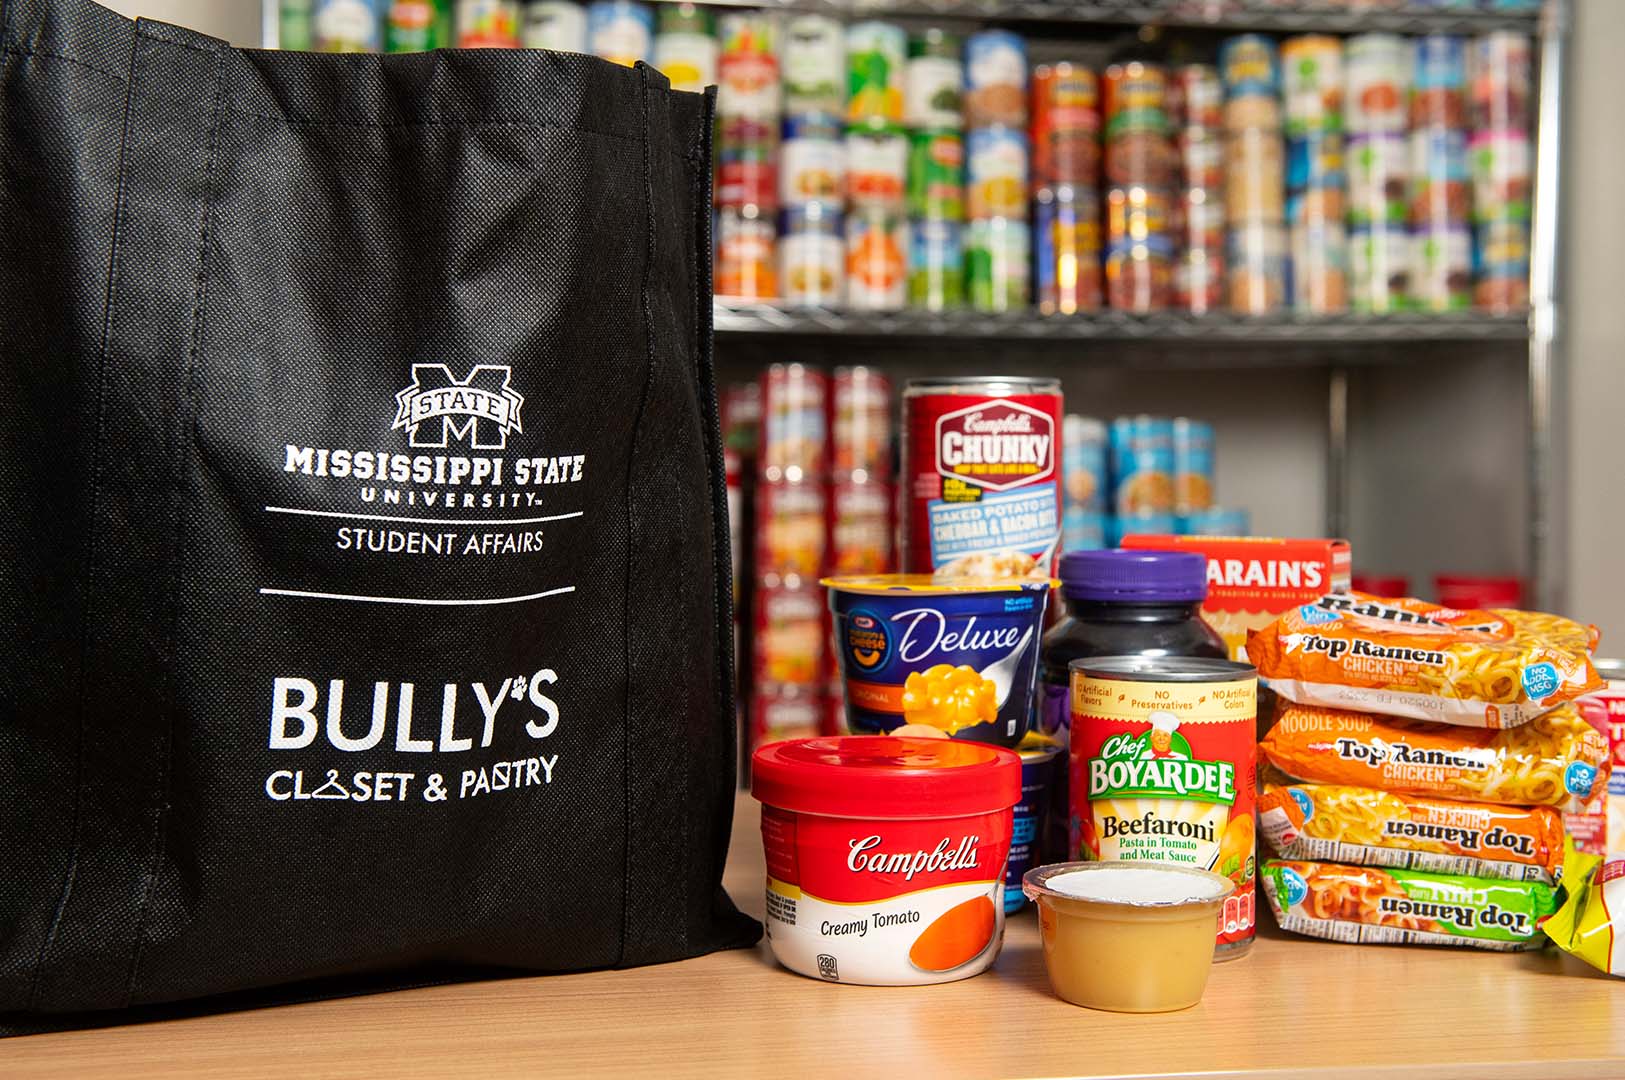 It is estimated that 36 percent of university students have limited or uncertain availability of food in the past 30 days. In January 2020, Mississippi State opened Bully�s Closet and Pantry to combat hunger on campus. Tax-deductible monetary donations to the MSU Food Security Network Fund can be made through the MSU Foundation at <a href="https://www.accelerate.msstate.edu" alt="Accelerate" target="_blank">www.accelerate.msstate.edu</a>. (Photo by Beth Wynn)